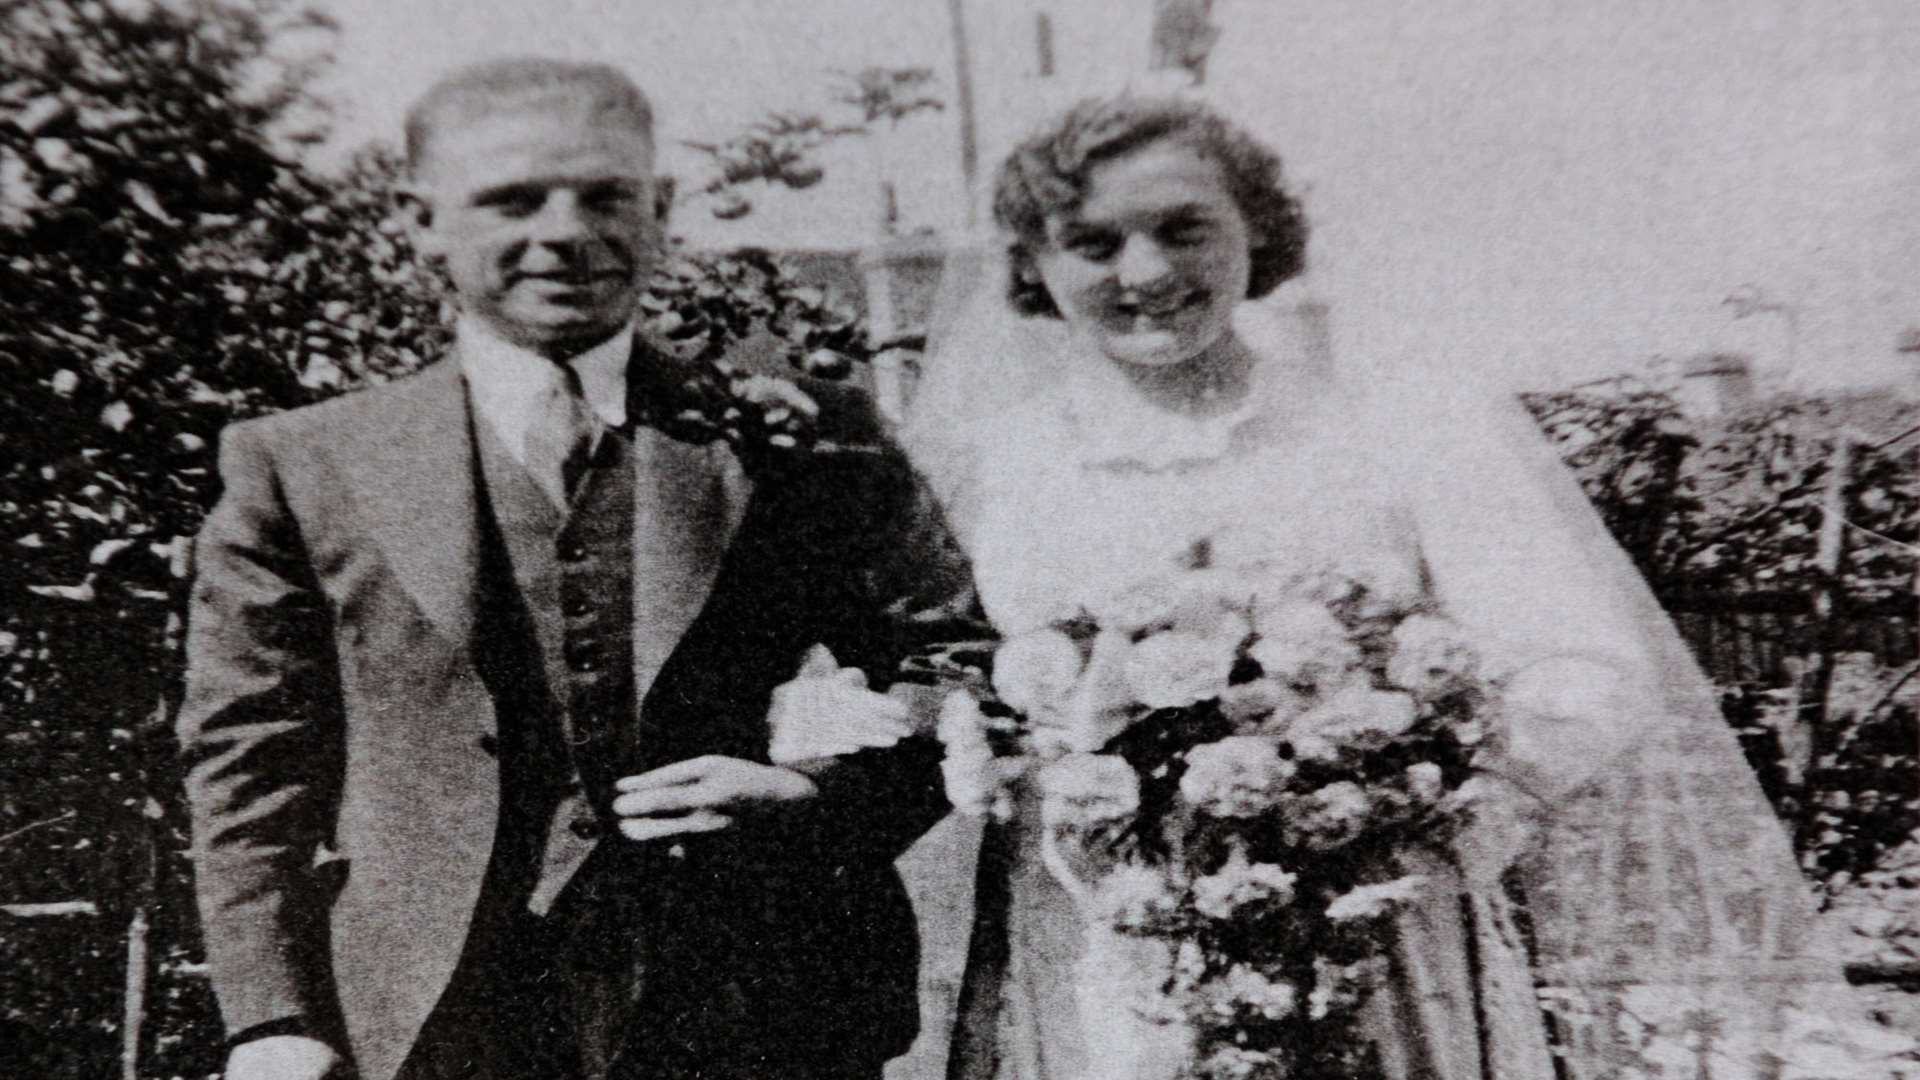 Jean Green and her husband Leonard on their wedding day in August 1939